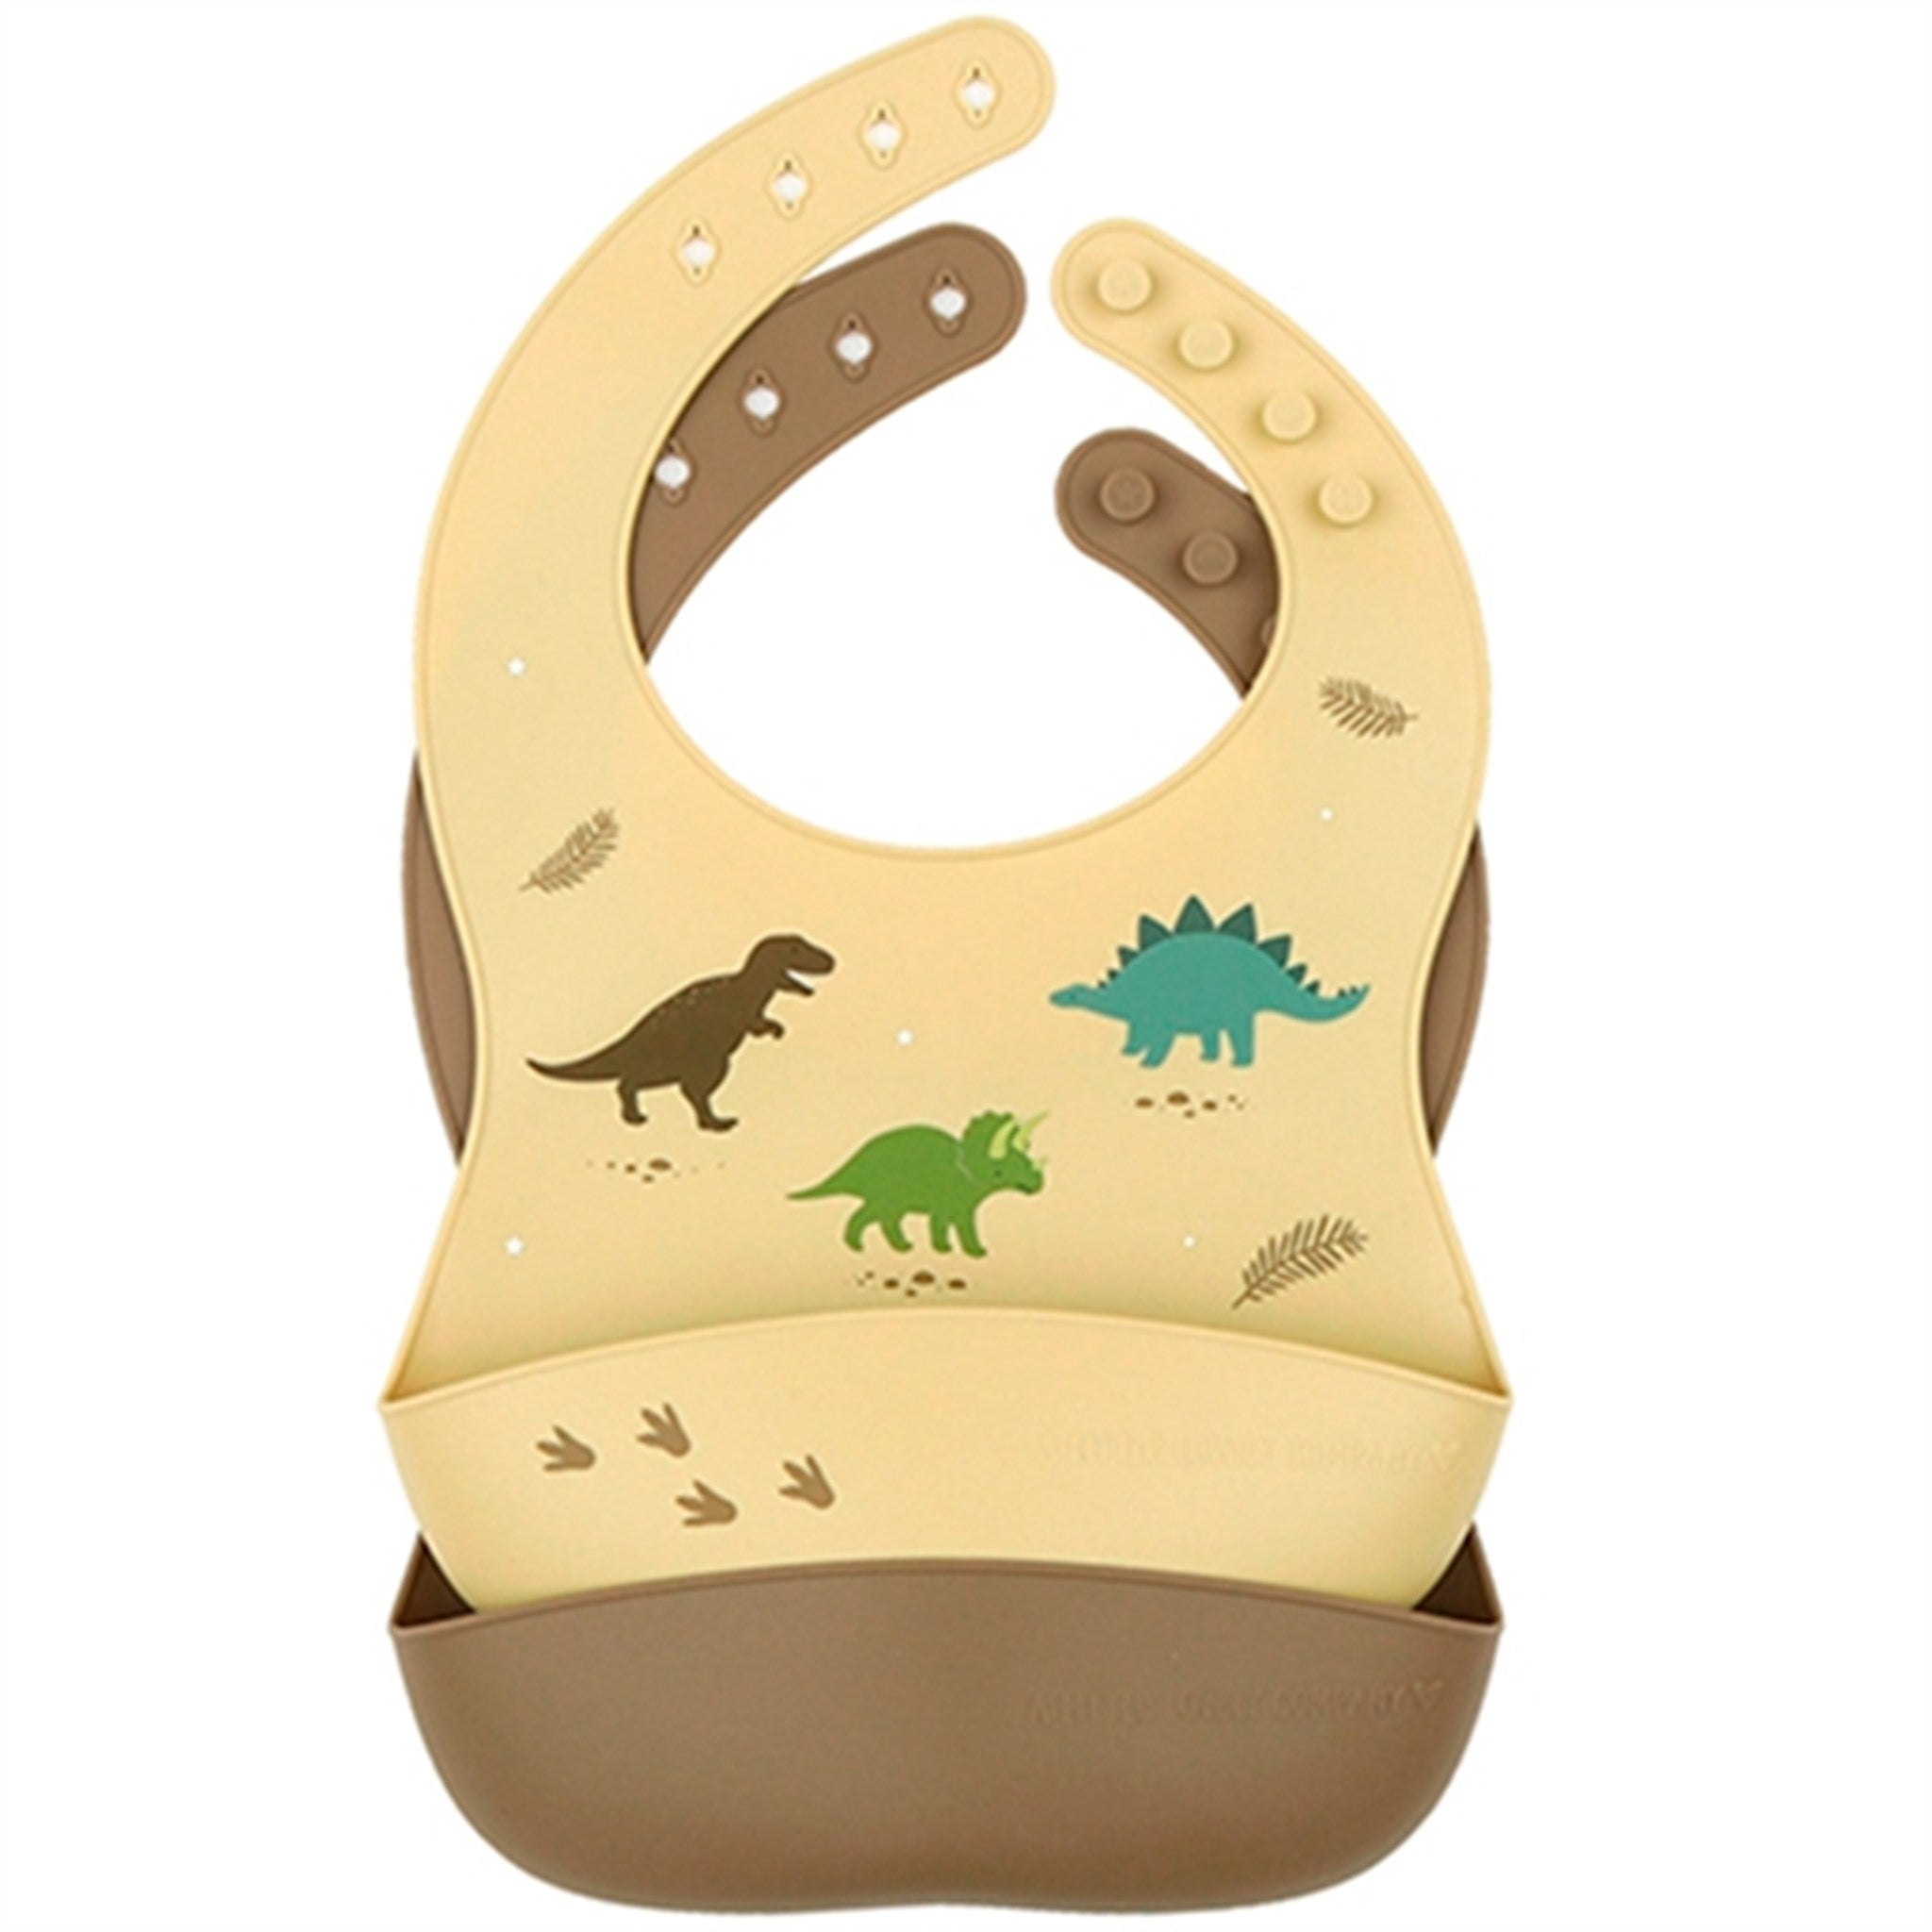 A Little Lovely Company Silicone Bib 2-pack Dinosaurs